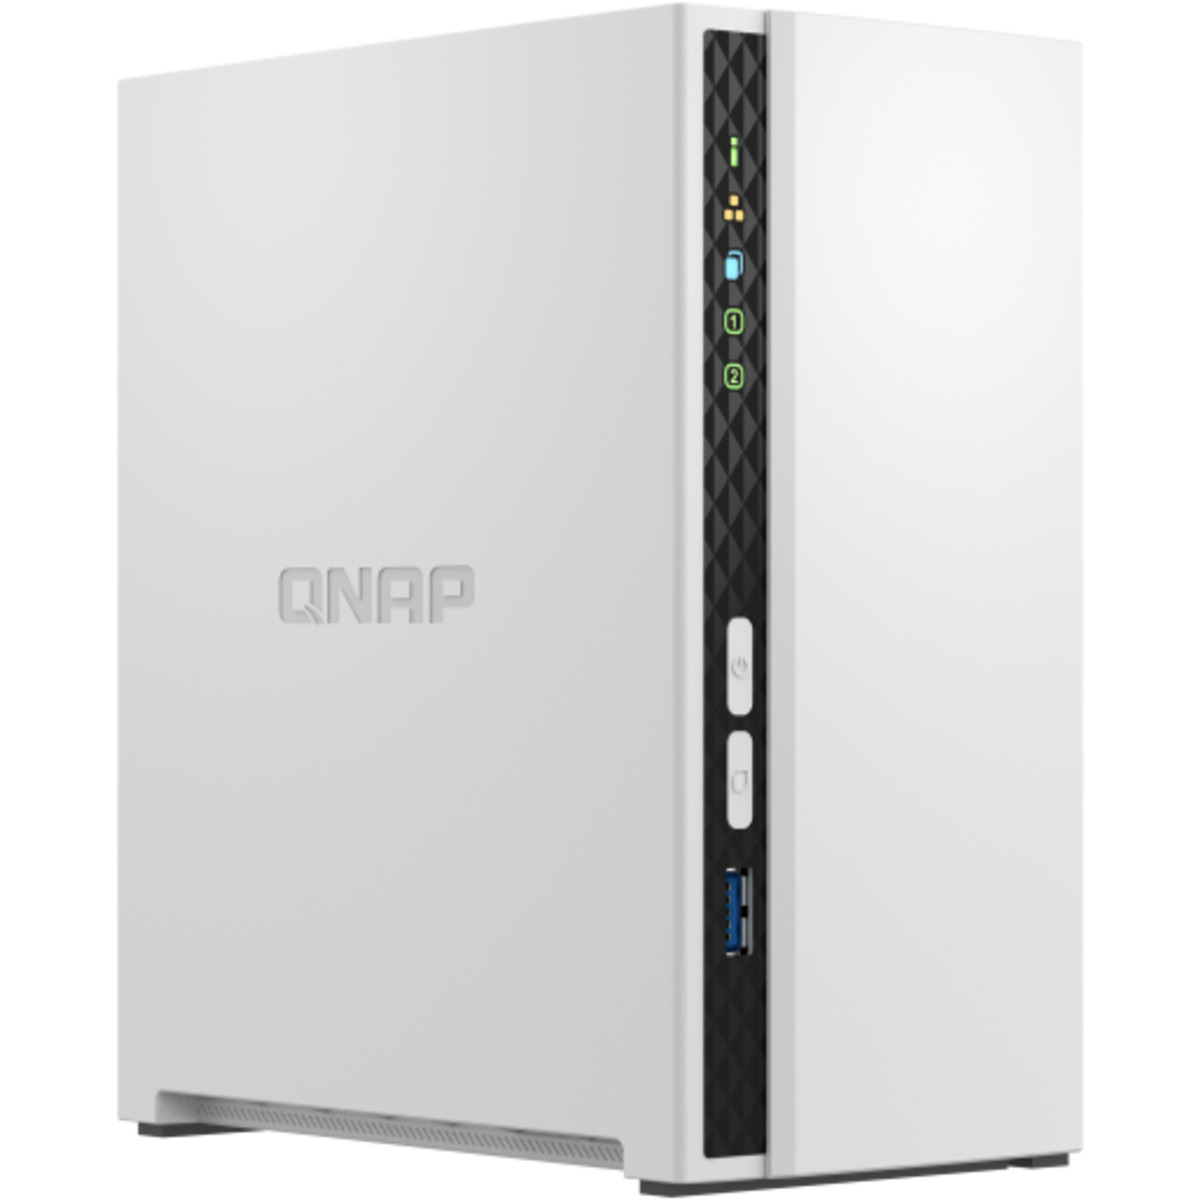 QNAP TS-233 6tb 2-Bay Desktop Personal / Basic Home / Small Office NAS - Network Attached Storage Device 1x6tb Western Digital Gold WD6003FRYZ 3.5 7200rpm SATA 6Gb/s HDD ENTERPRISE Class Drives Installed - Burn-In Tested TS-233